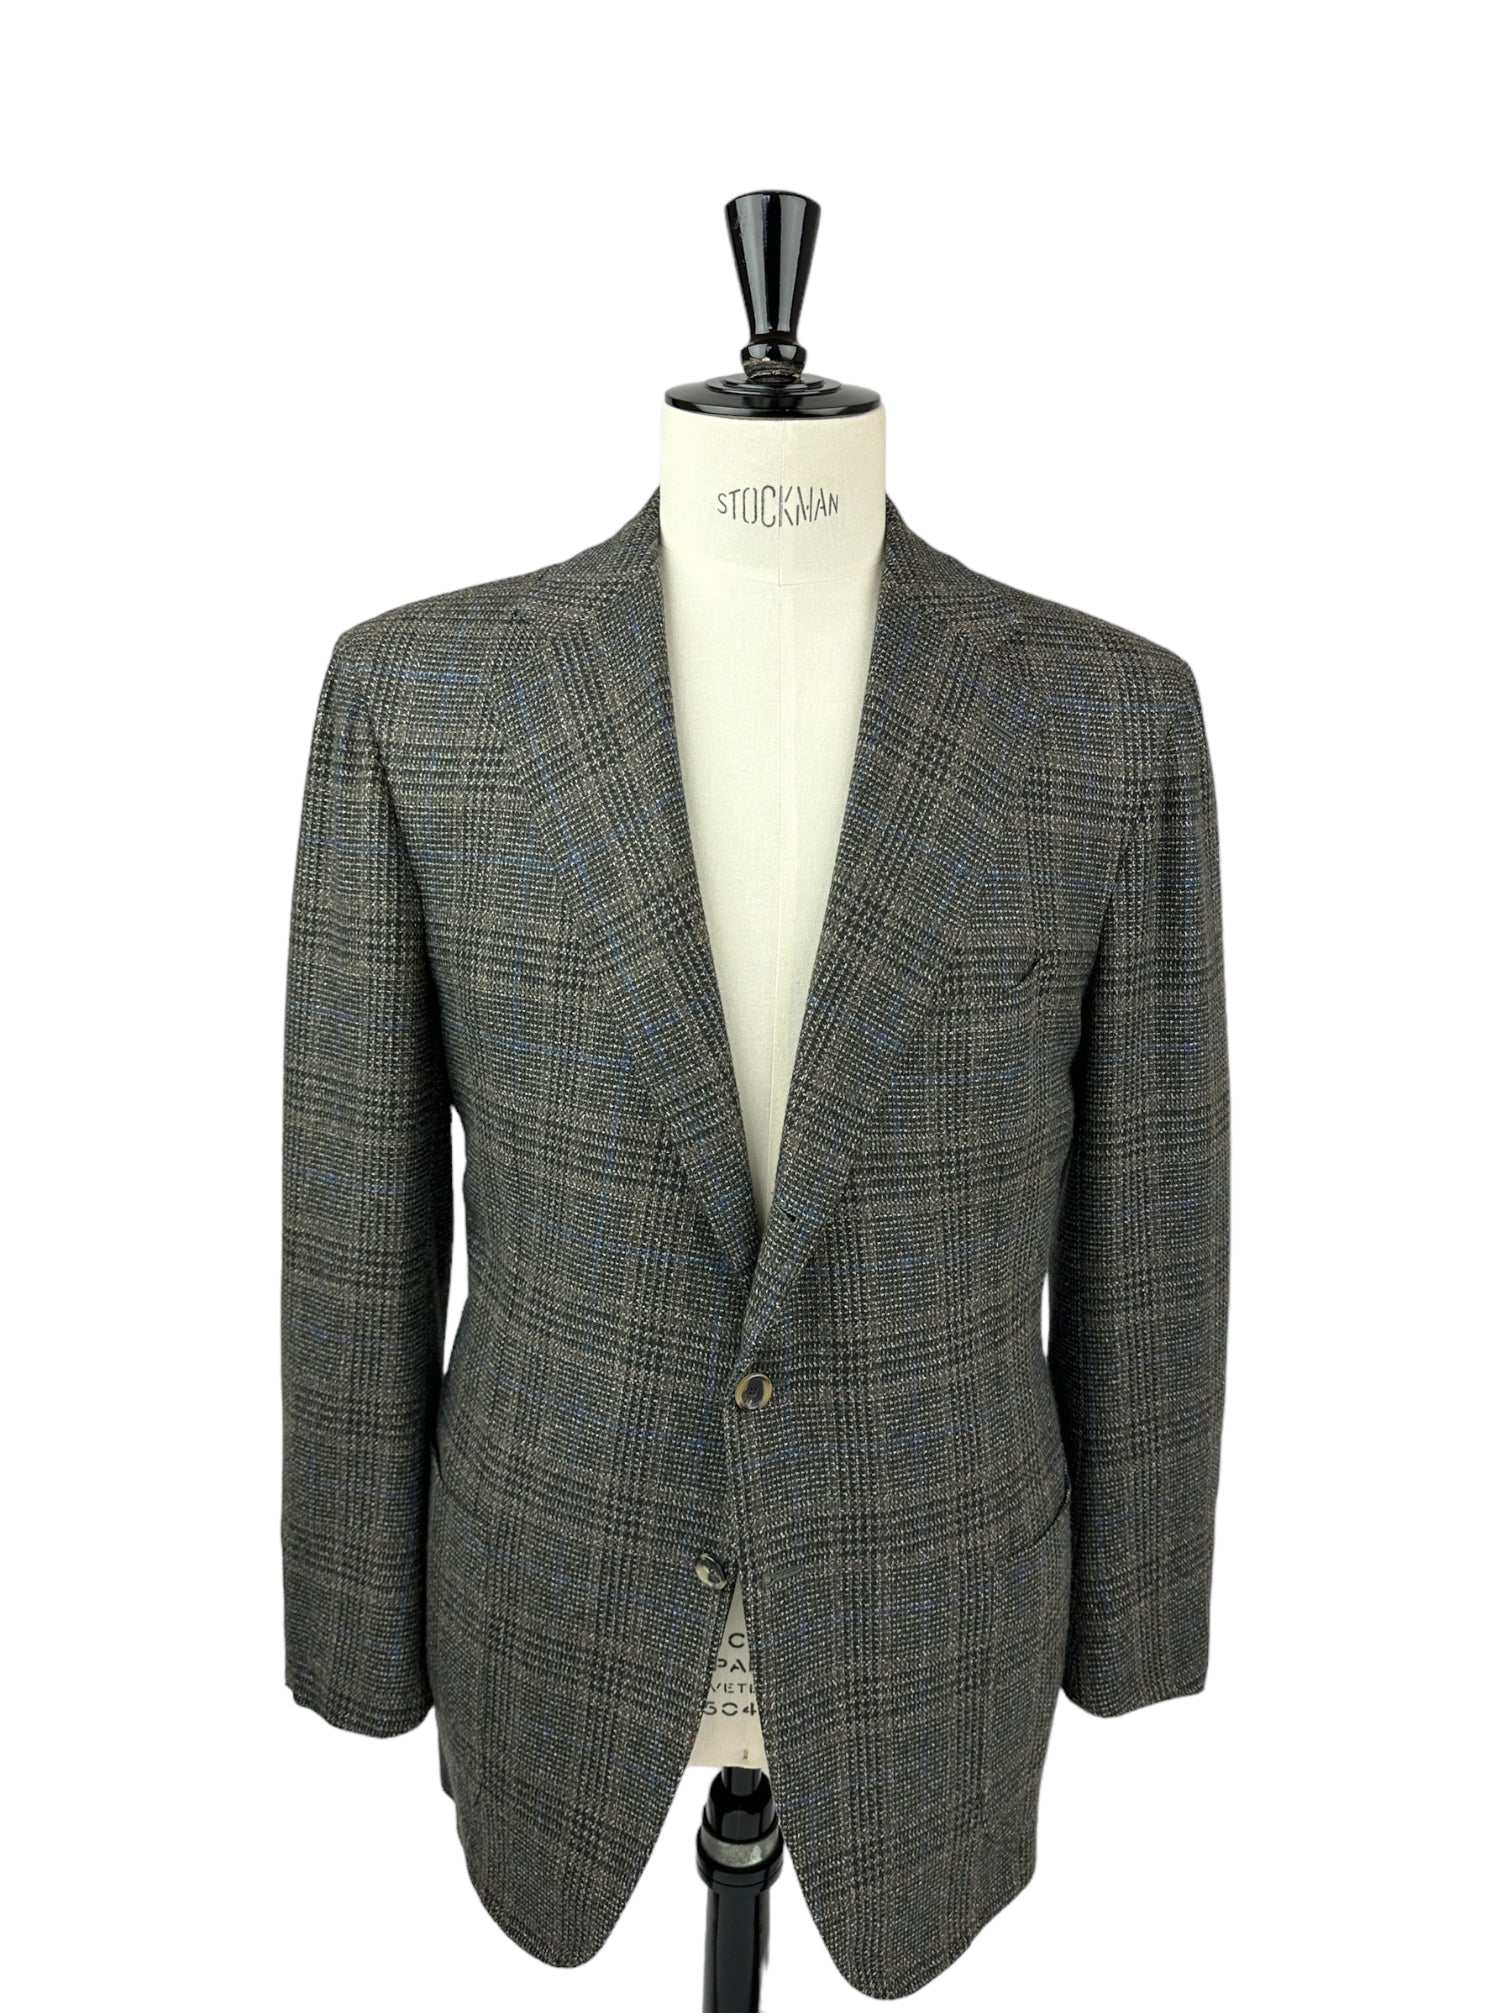 Cesare Attolini Olive Green Prince of Wales Cashmere Jacket